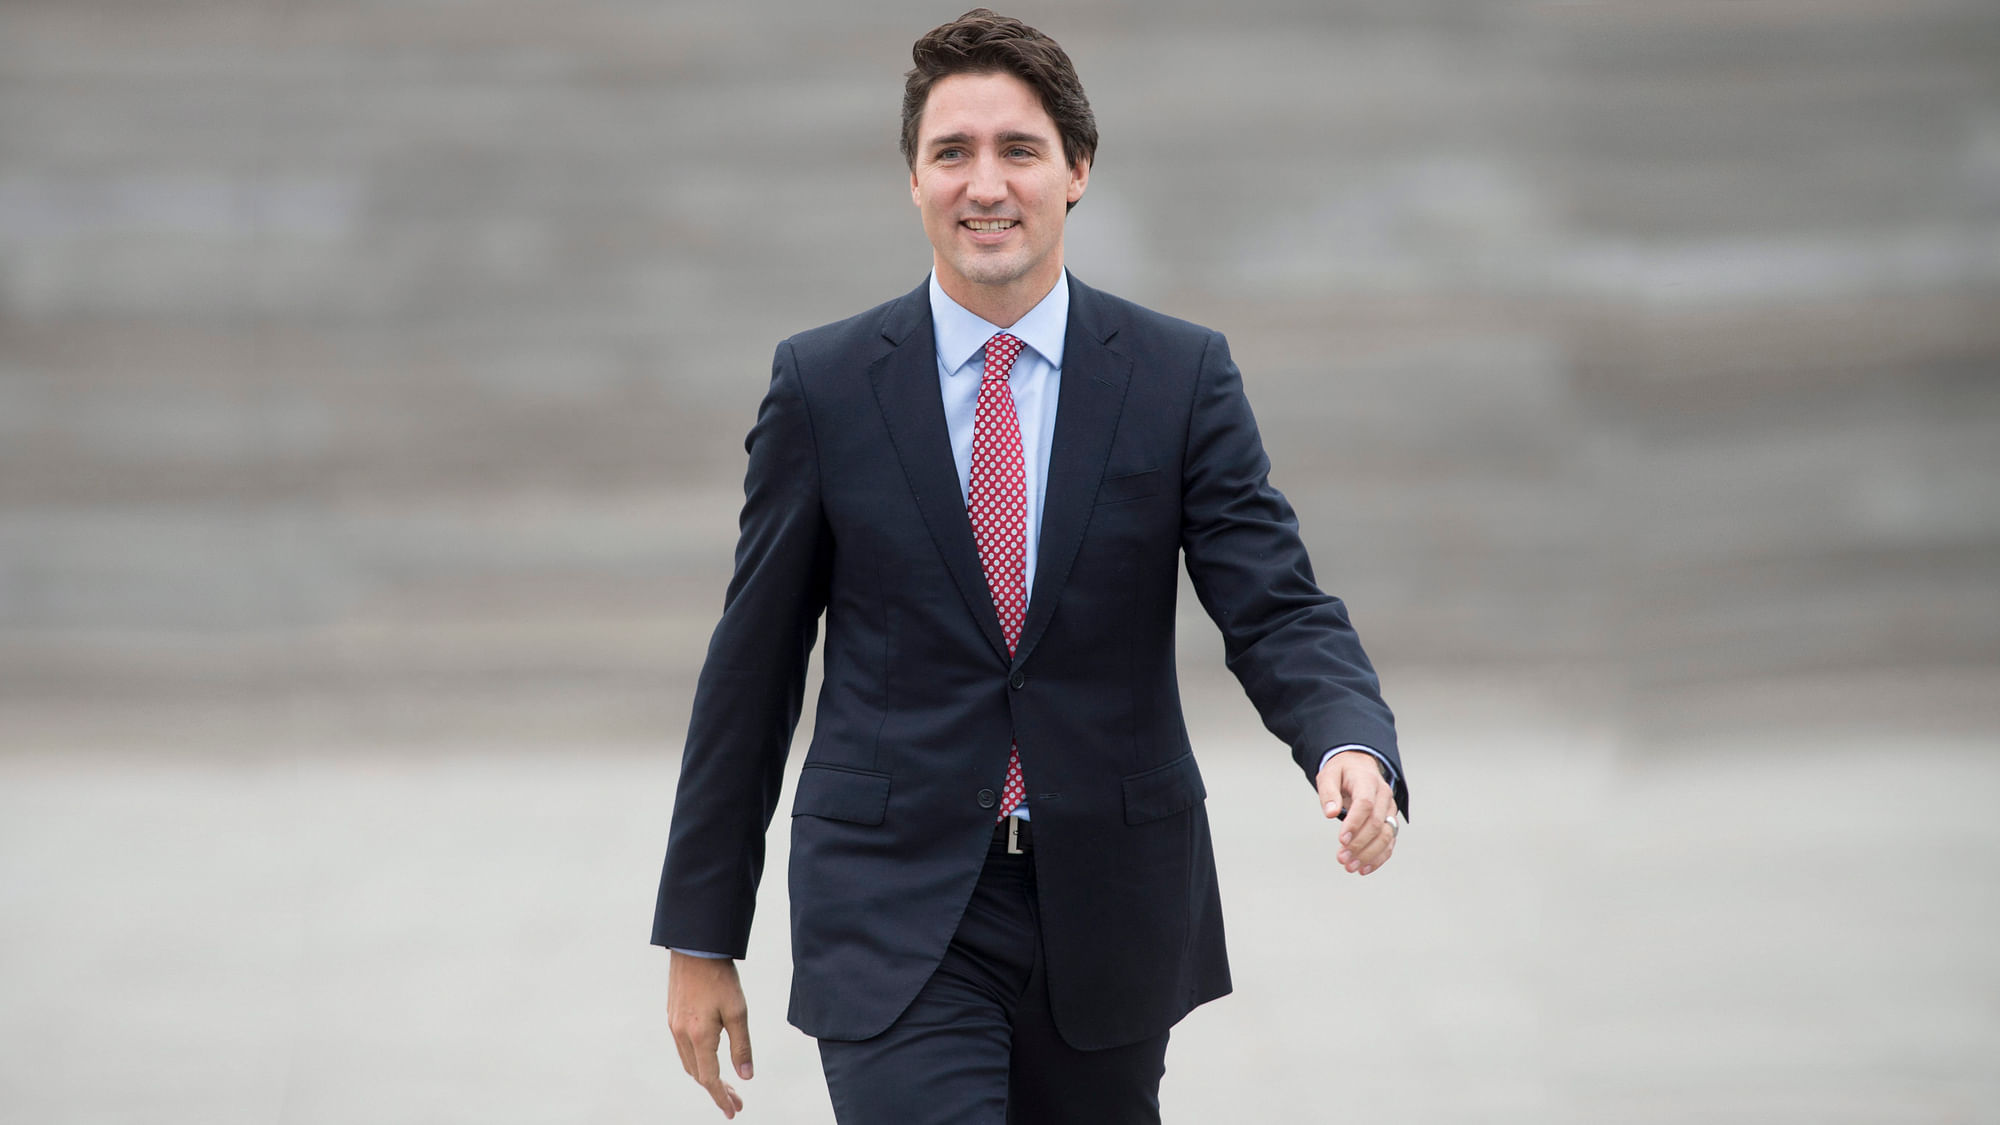 Is Justin Trudeau walking to the Senate or modelling on a ramp? (Photo: AP)